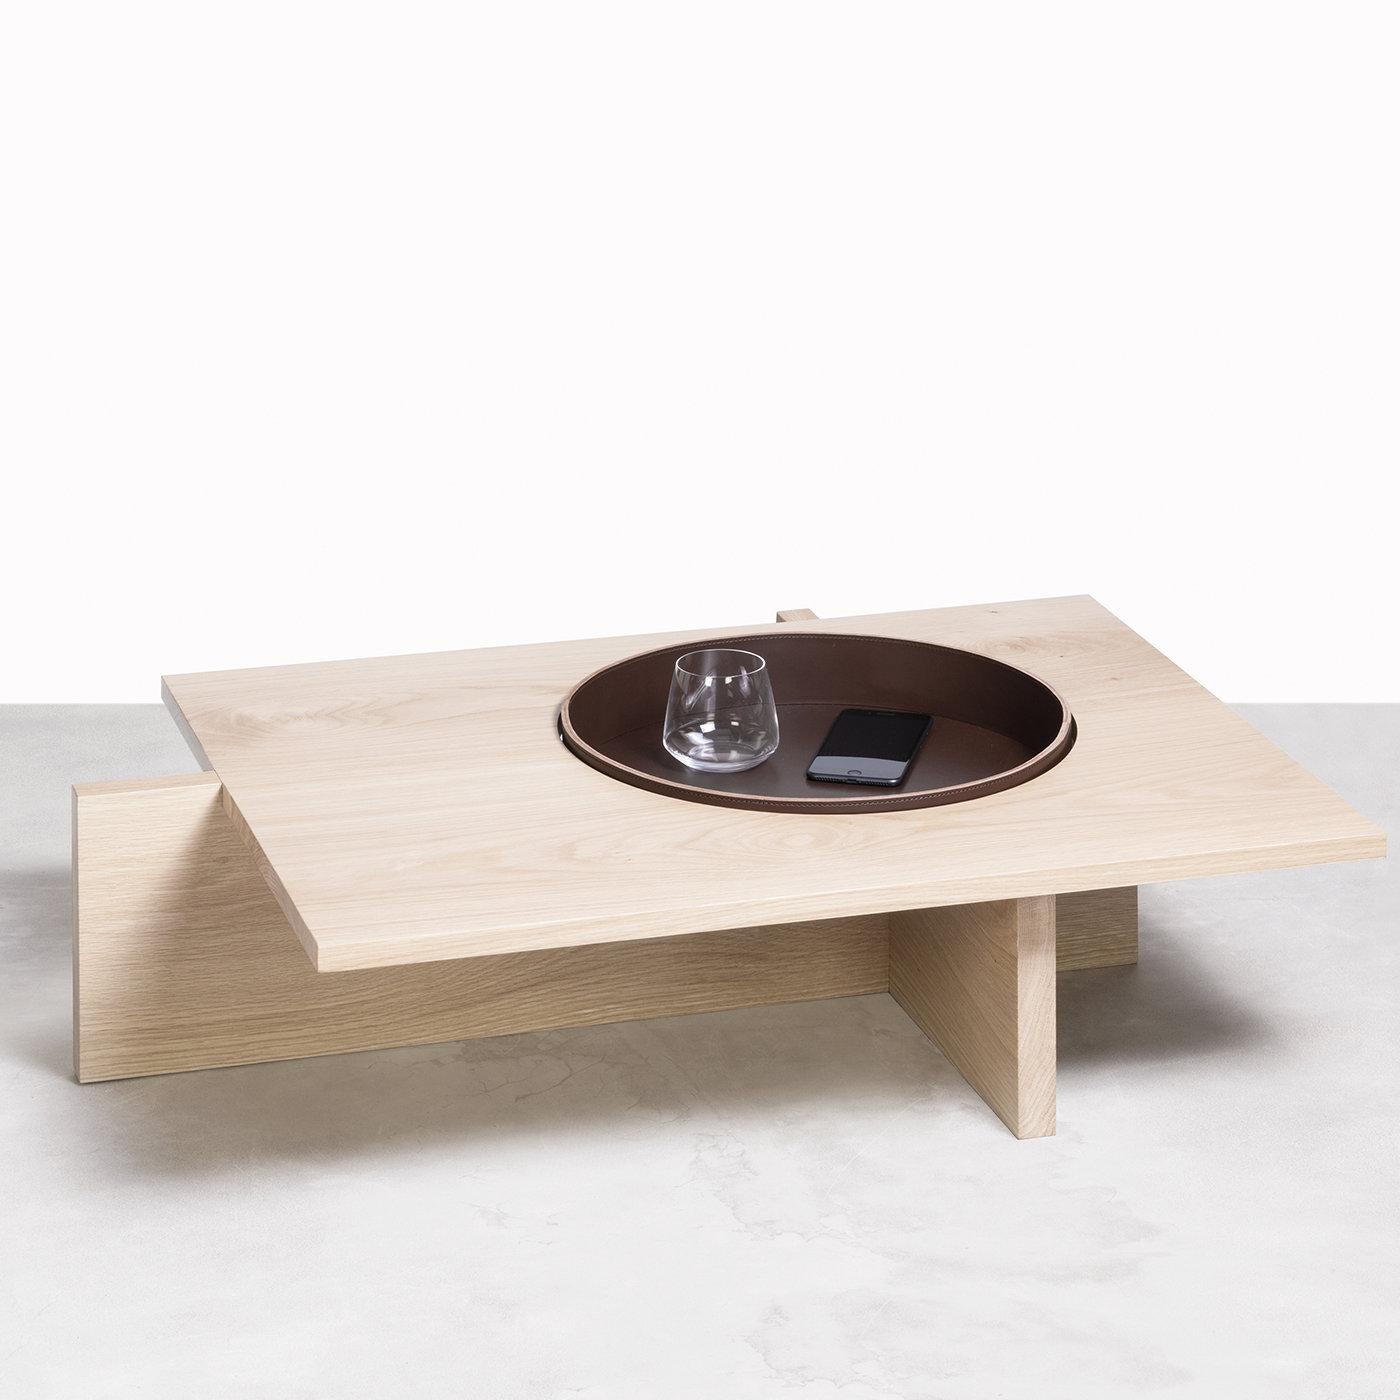 A unique structure made by planes intersected with each other and made of ash wood and natural wood. The saddle leather tray completes this wonderful coffee table. The Rabitti 1969 products are all made with vegetable tanned saddle leather, which